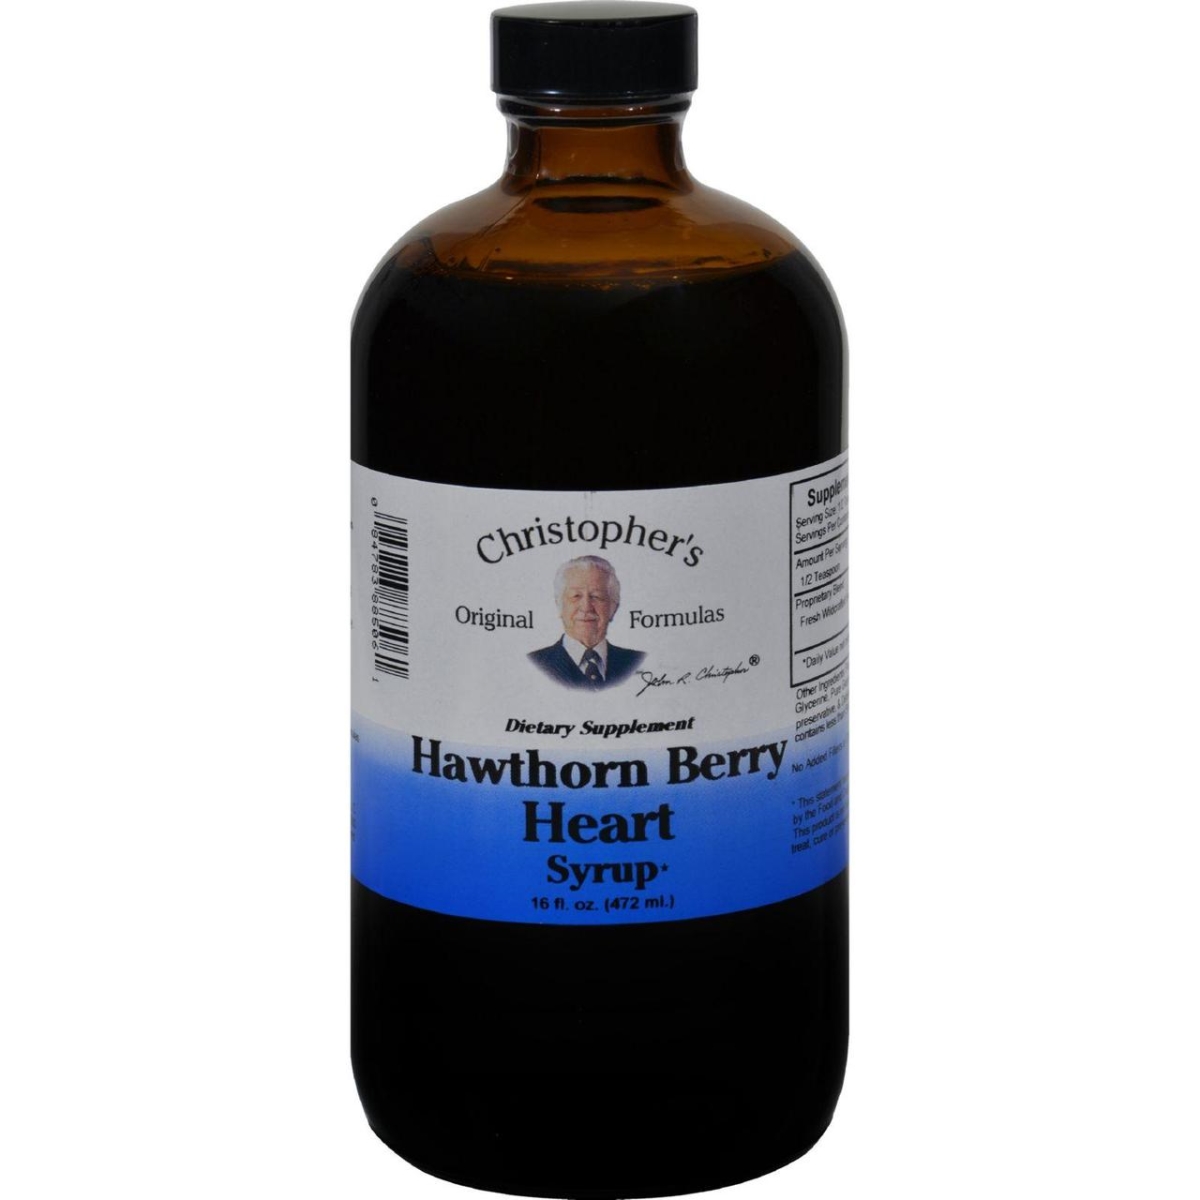 Picture of Dr. Christophers Formulas HG0412015 16 fl oz Hawthorn Berry Heart Syrup